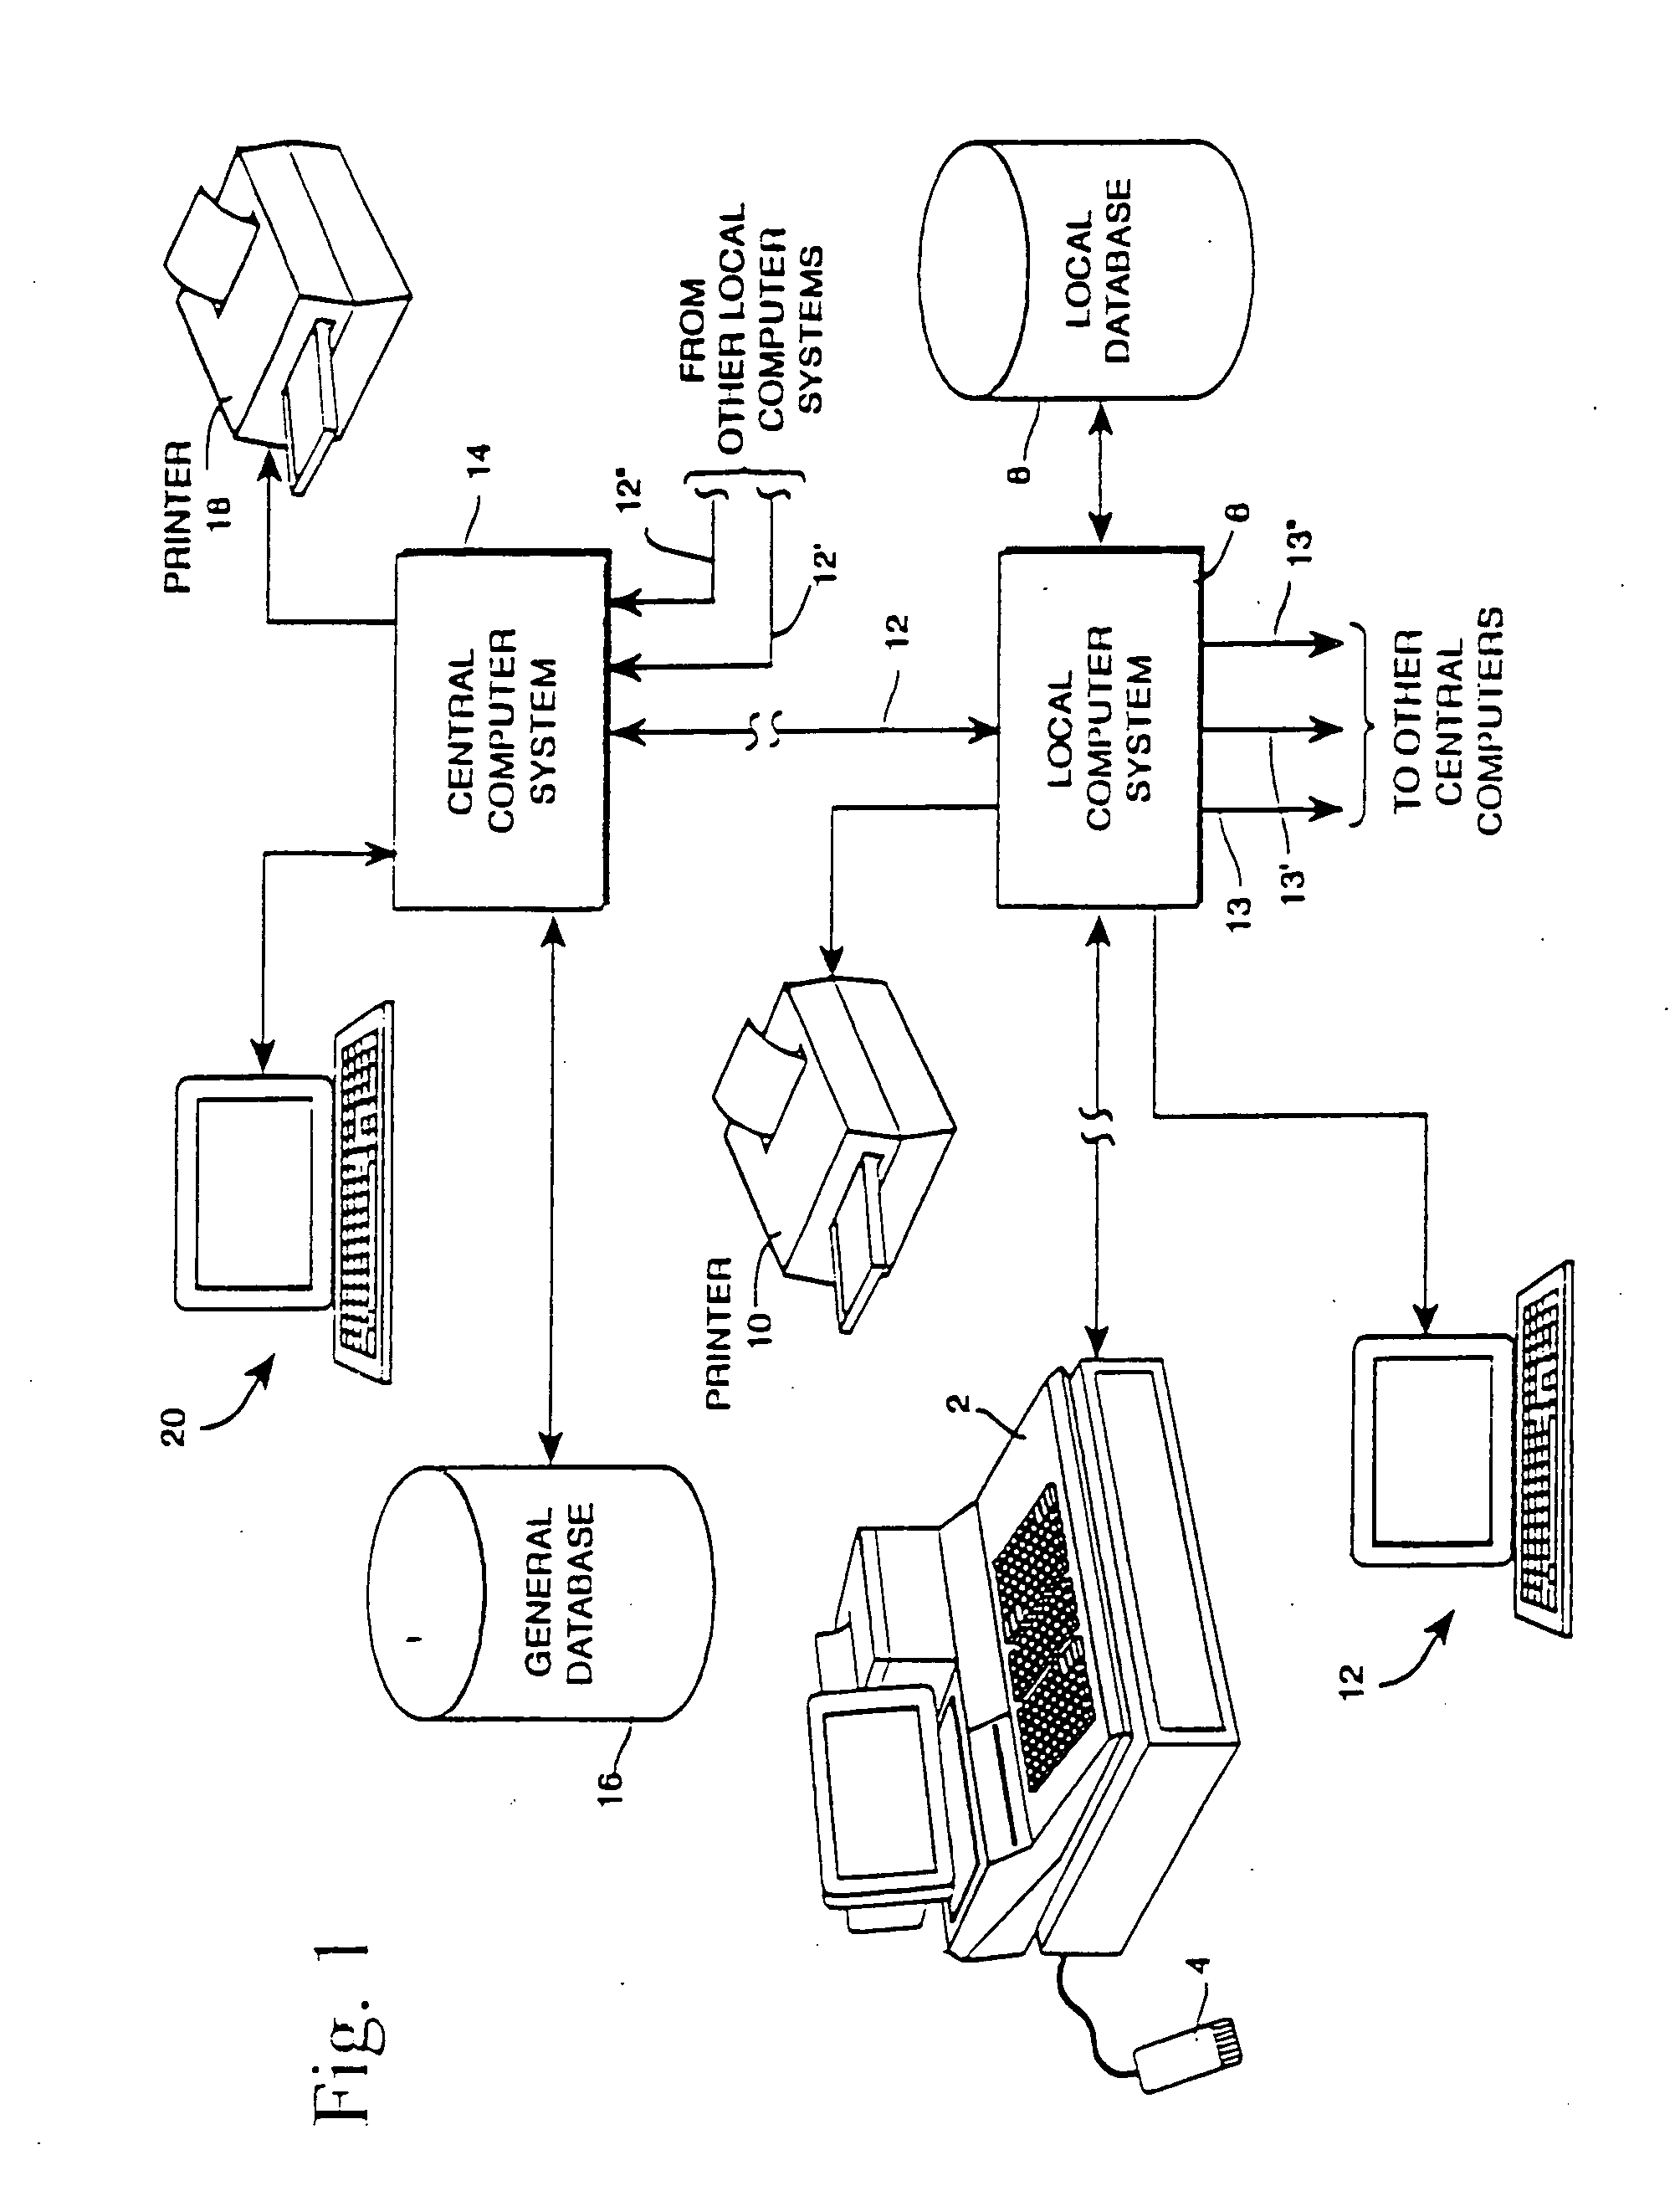 Systems and methods for product authentication and warranty verification for online auction houses